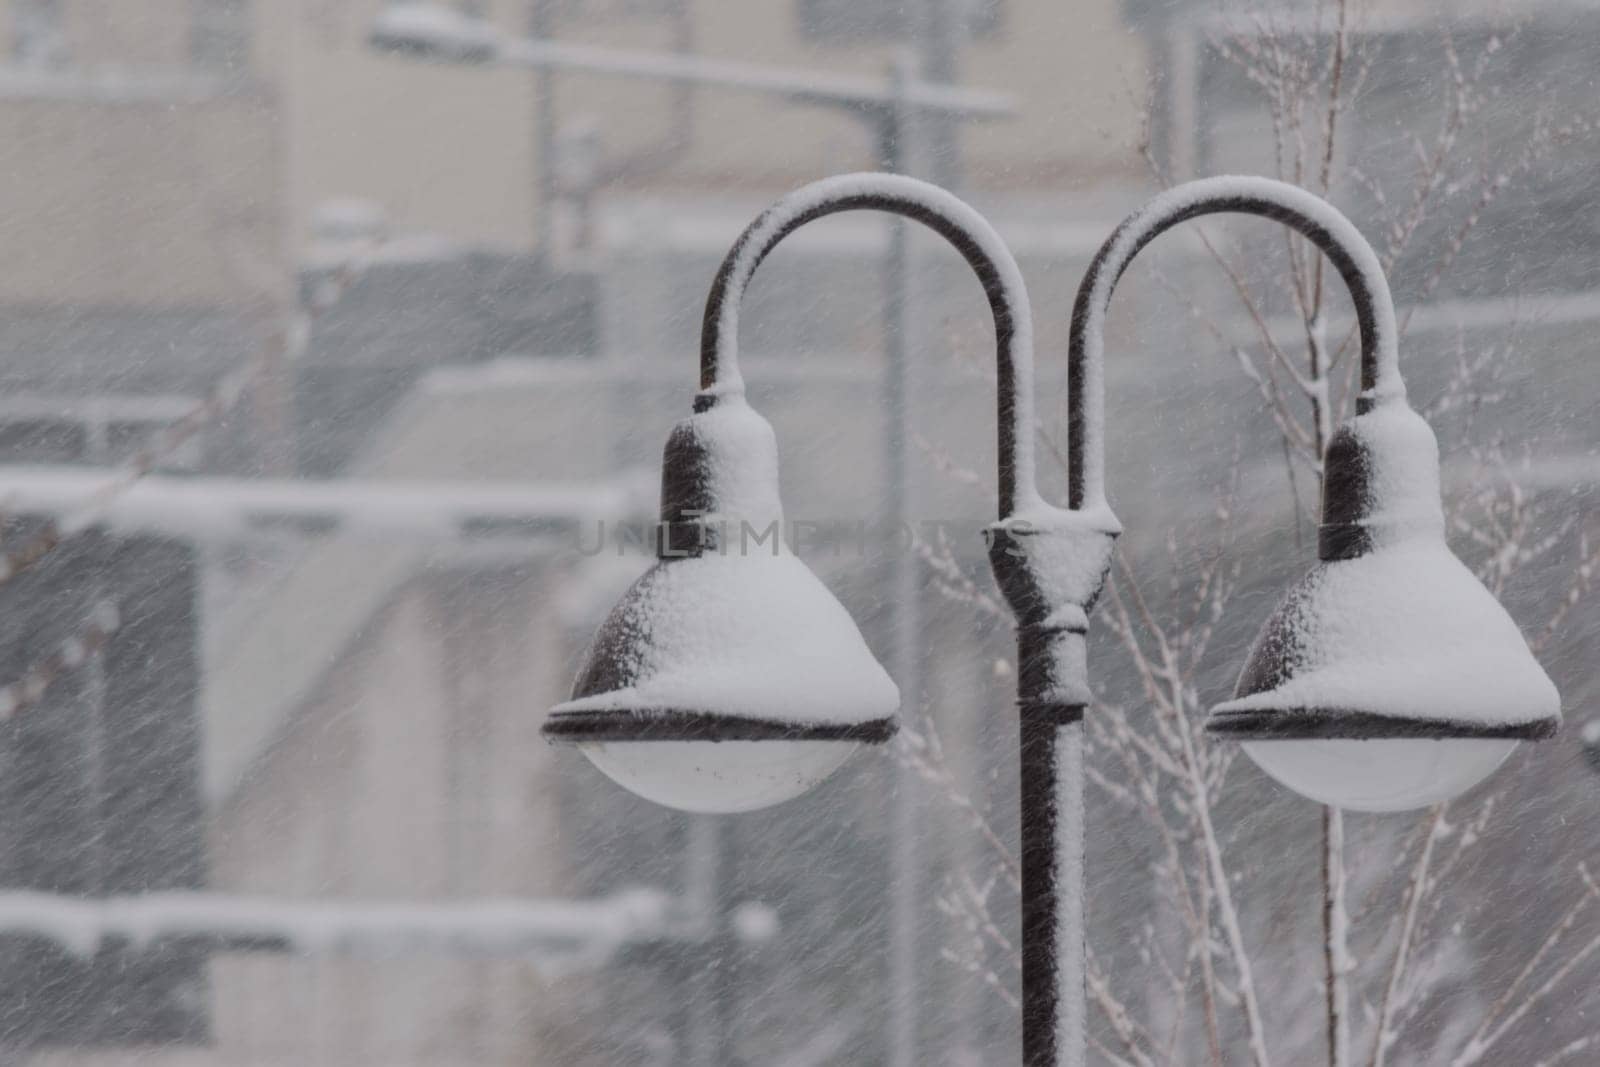 Two lights in a snowstorm by jameshumble